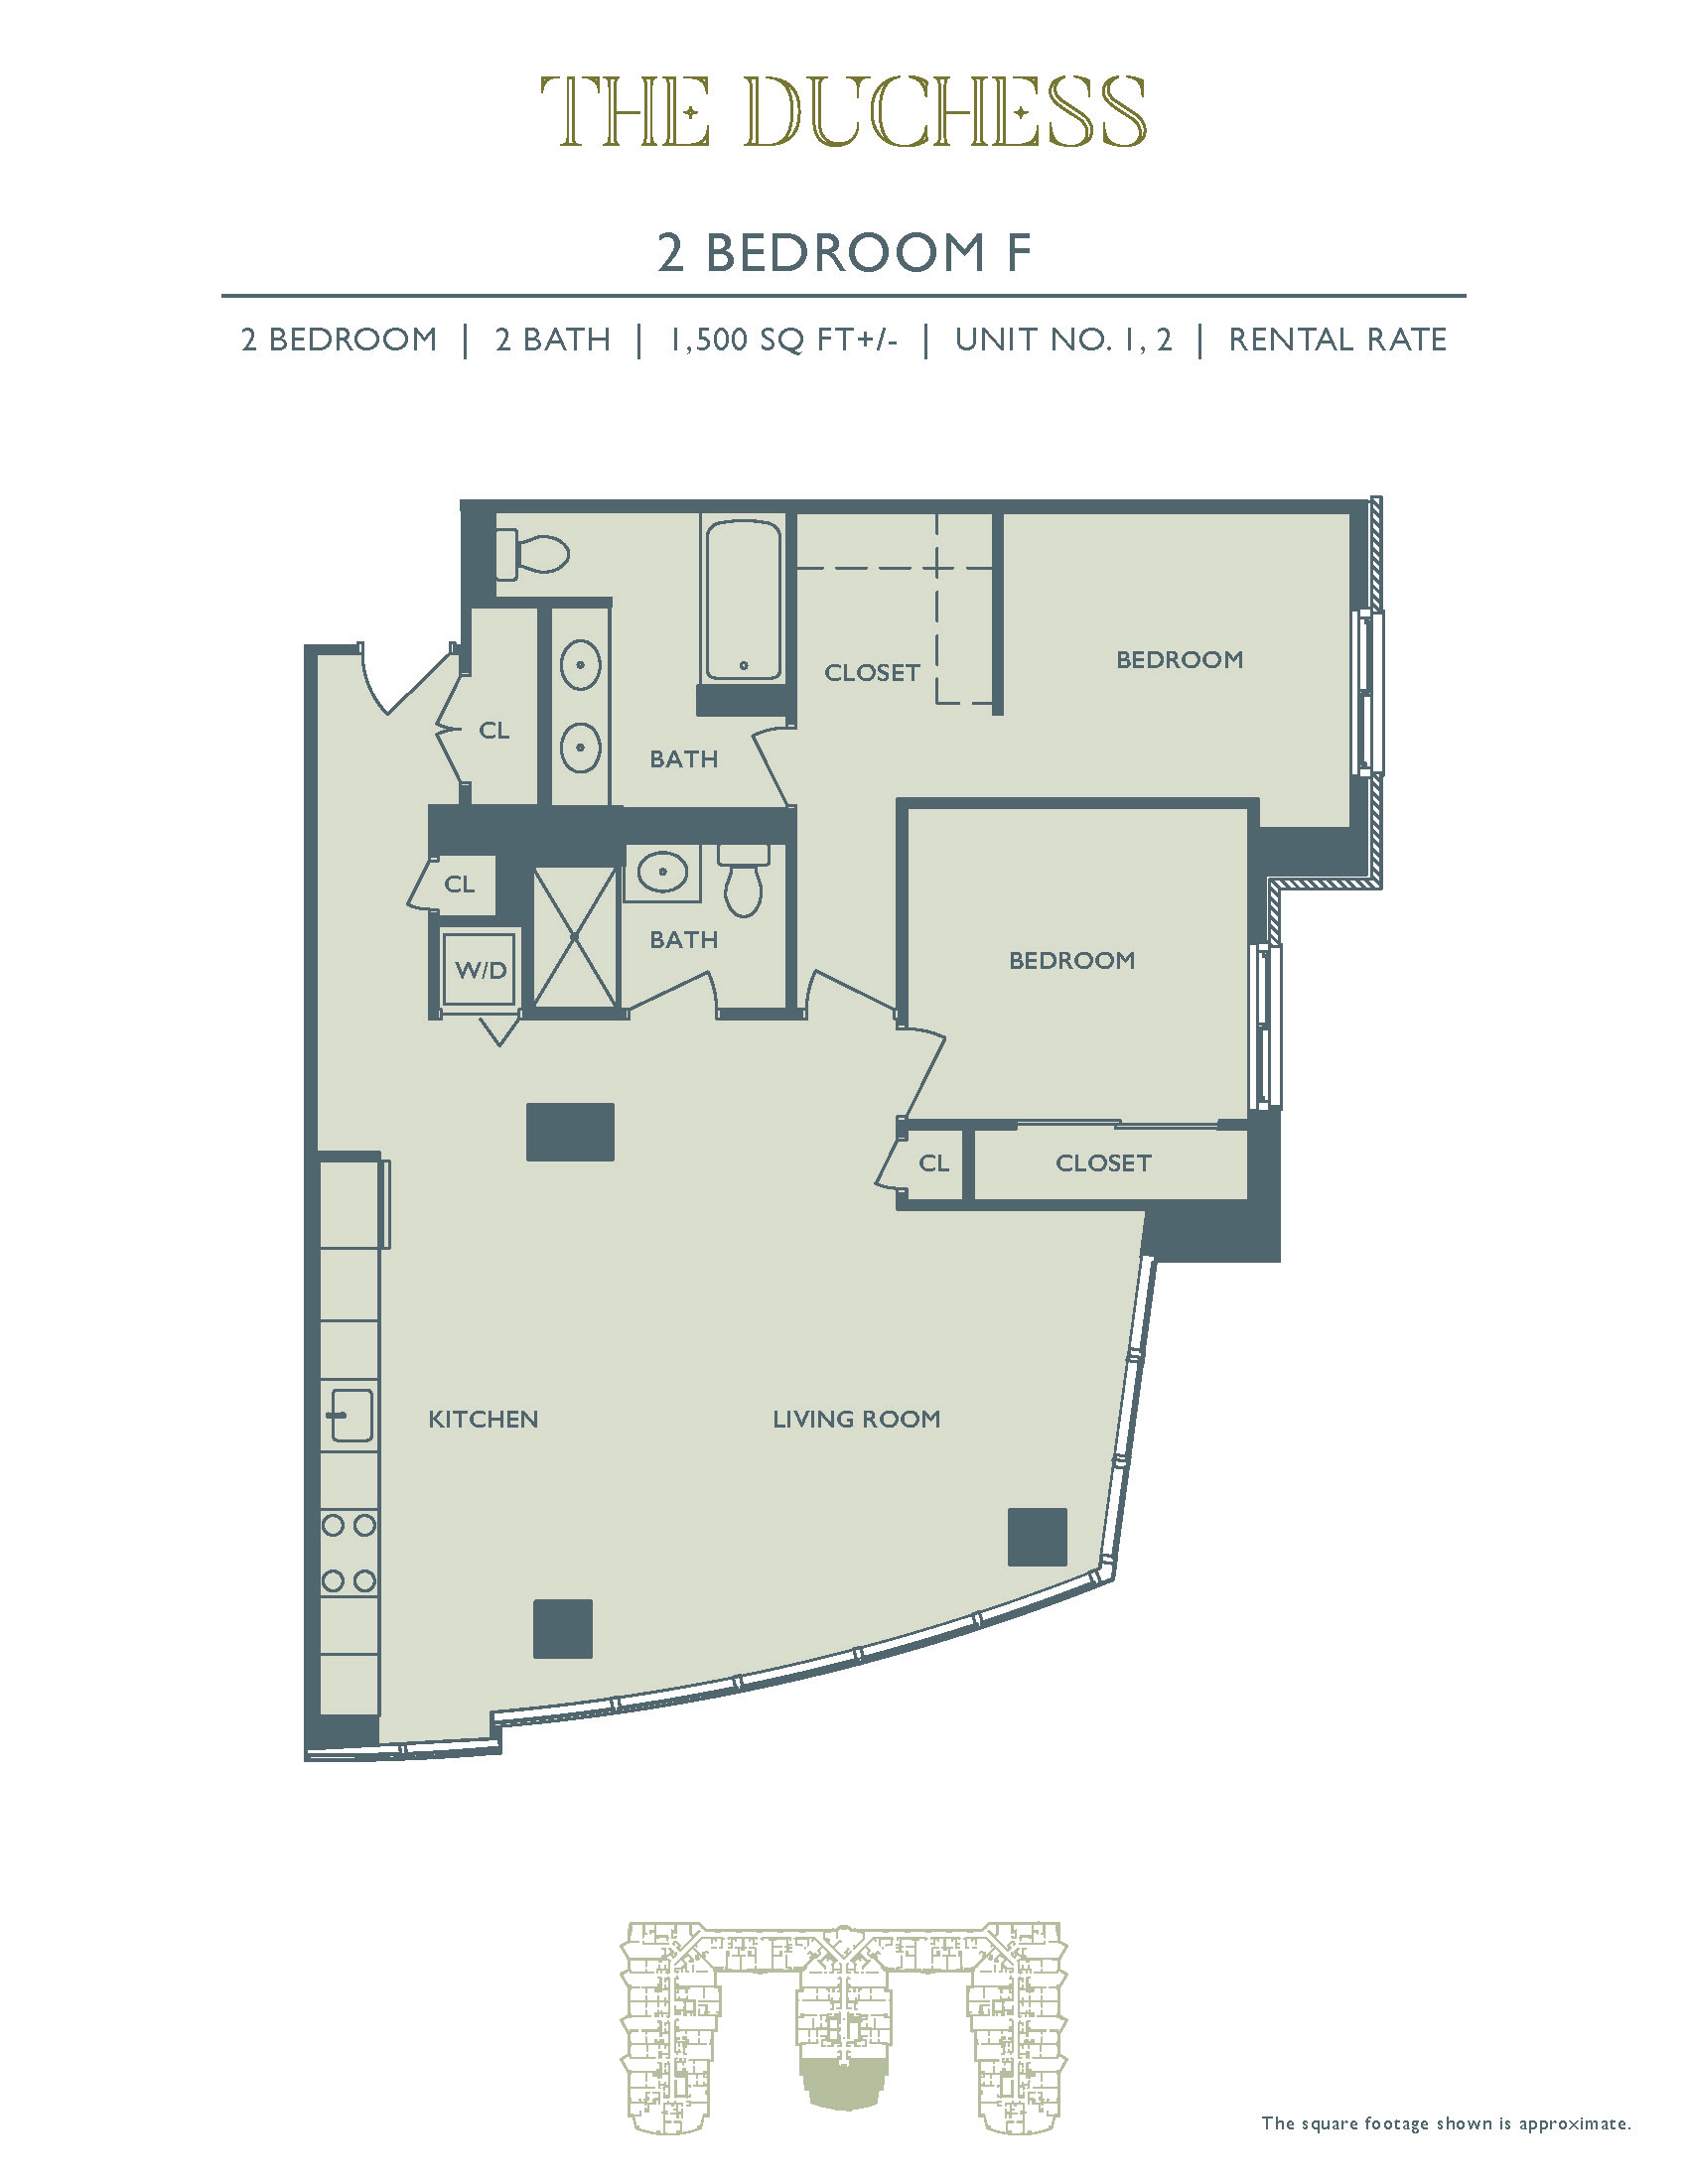 2 BR Layout F